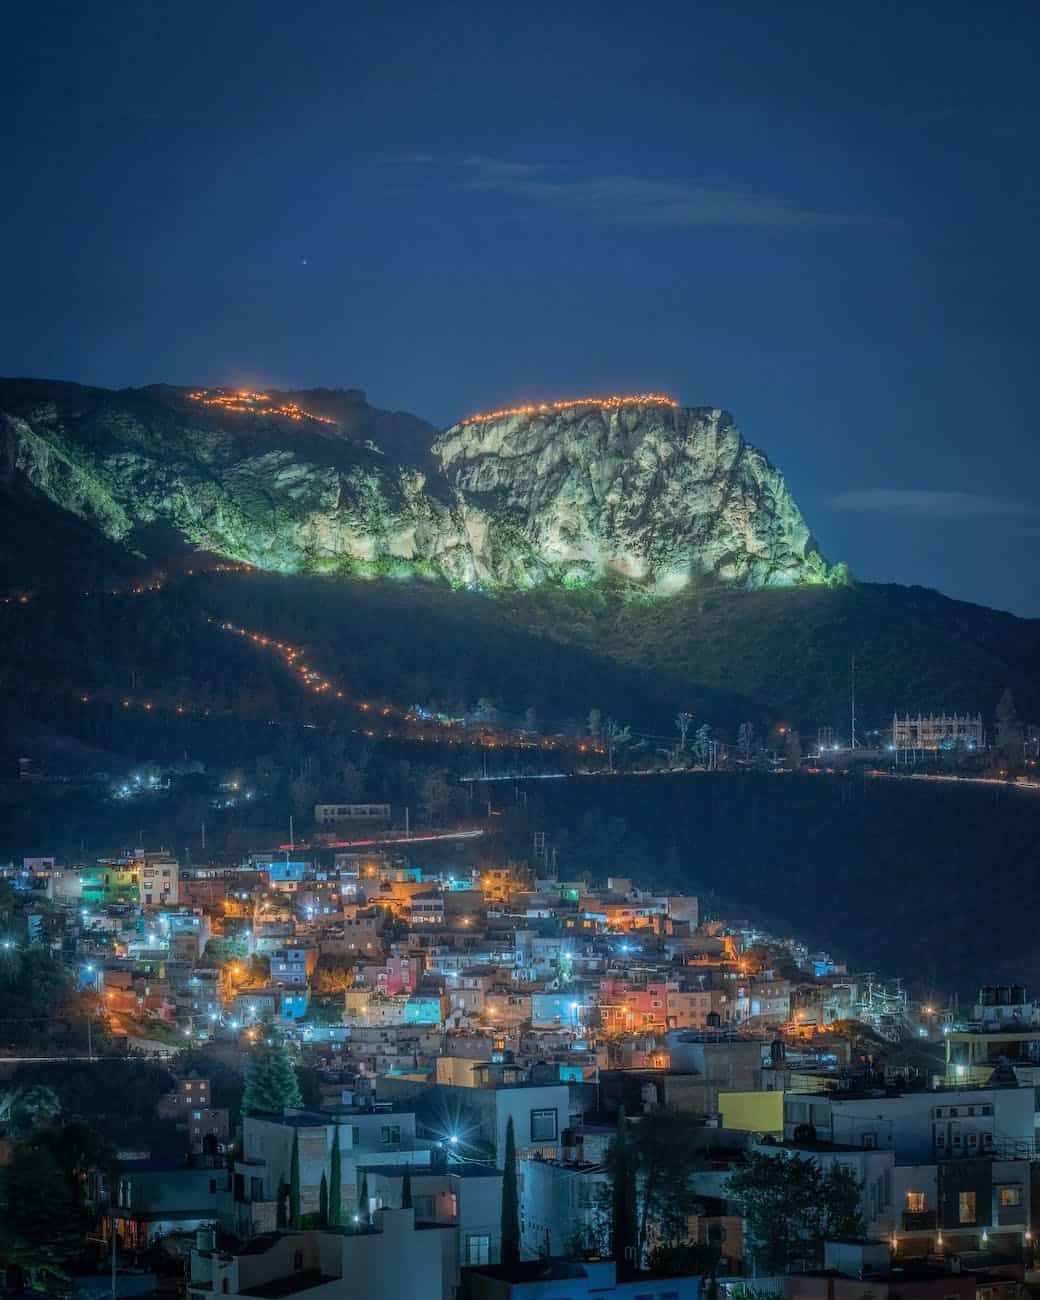 city near mountain during night time